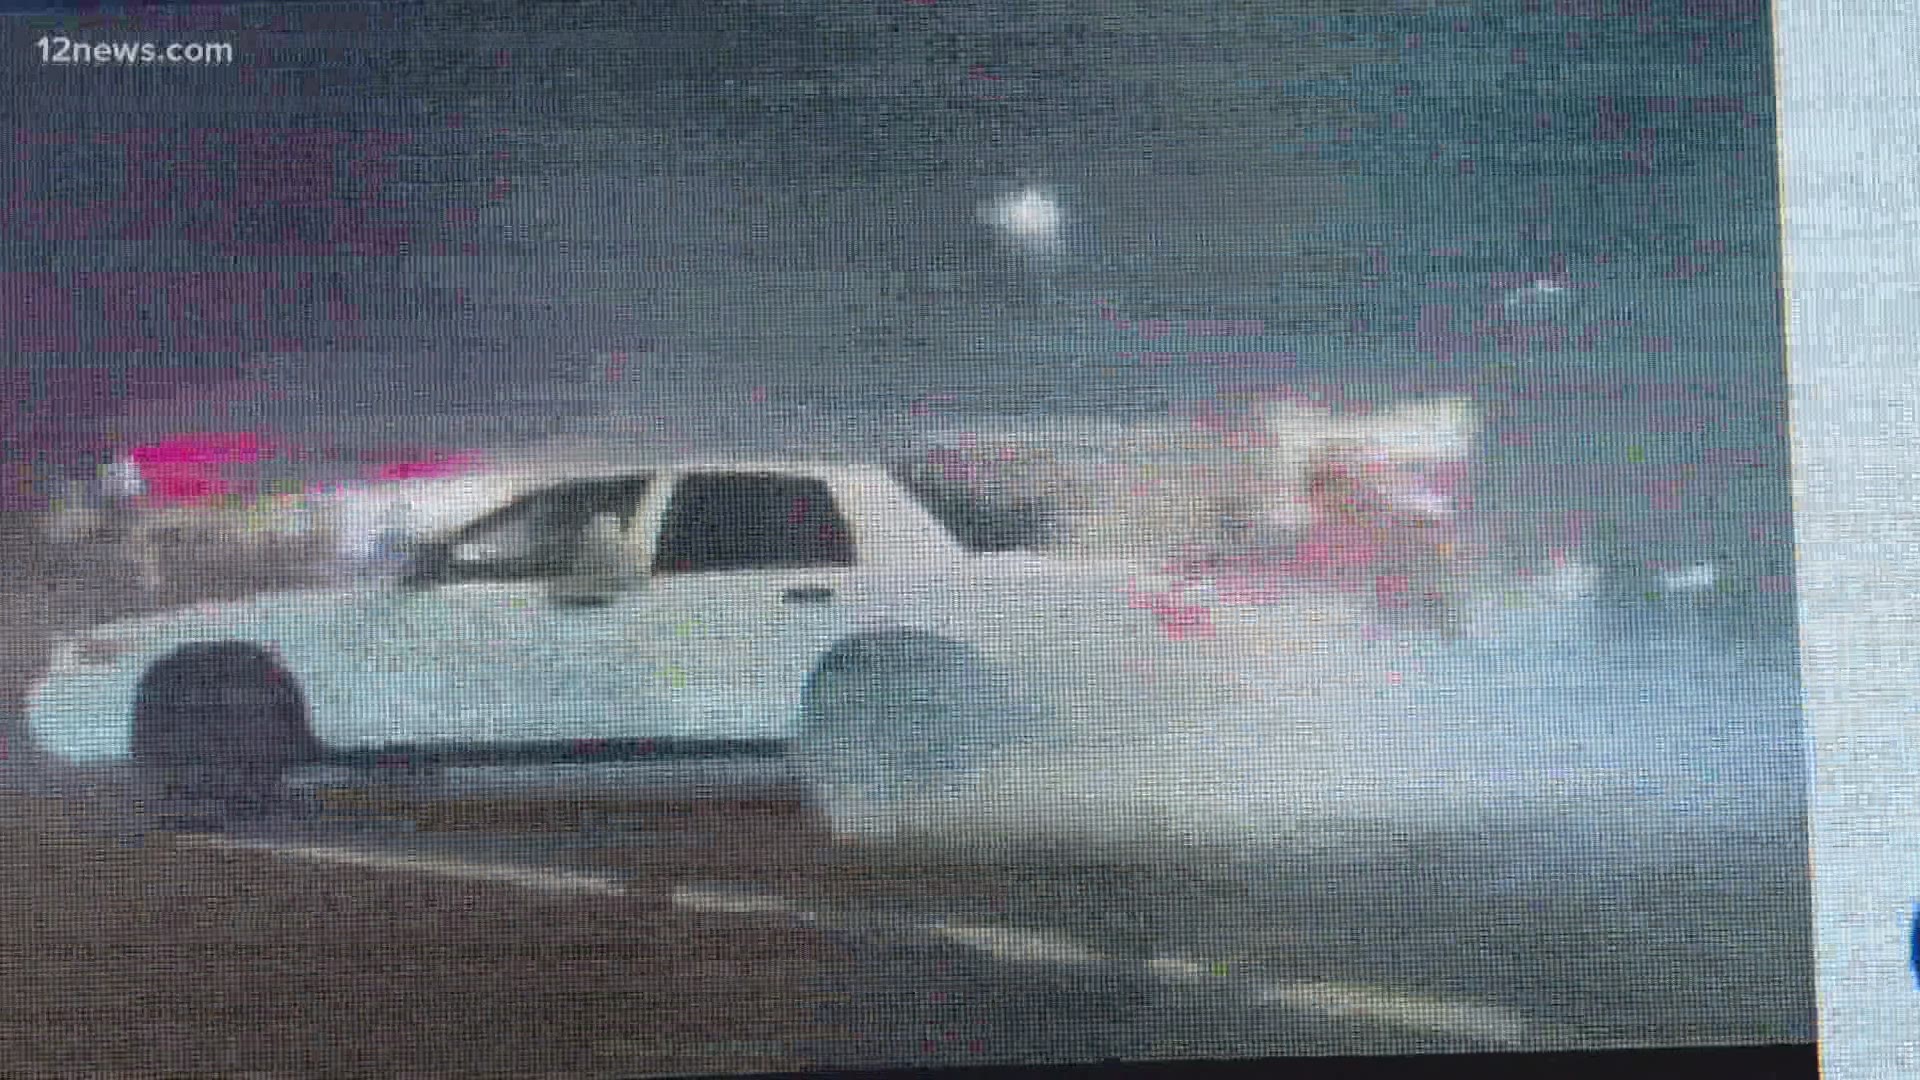 Illegal street racing is very much a problem on Phoenix streets. Will Pitts talks about the efforts to stop the activity and a recent incident in Phoenix.